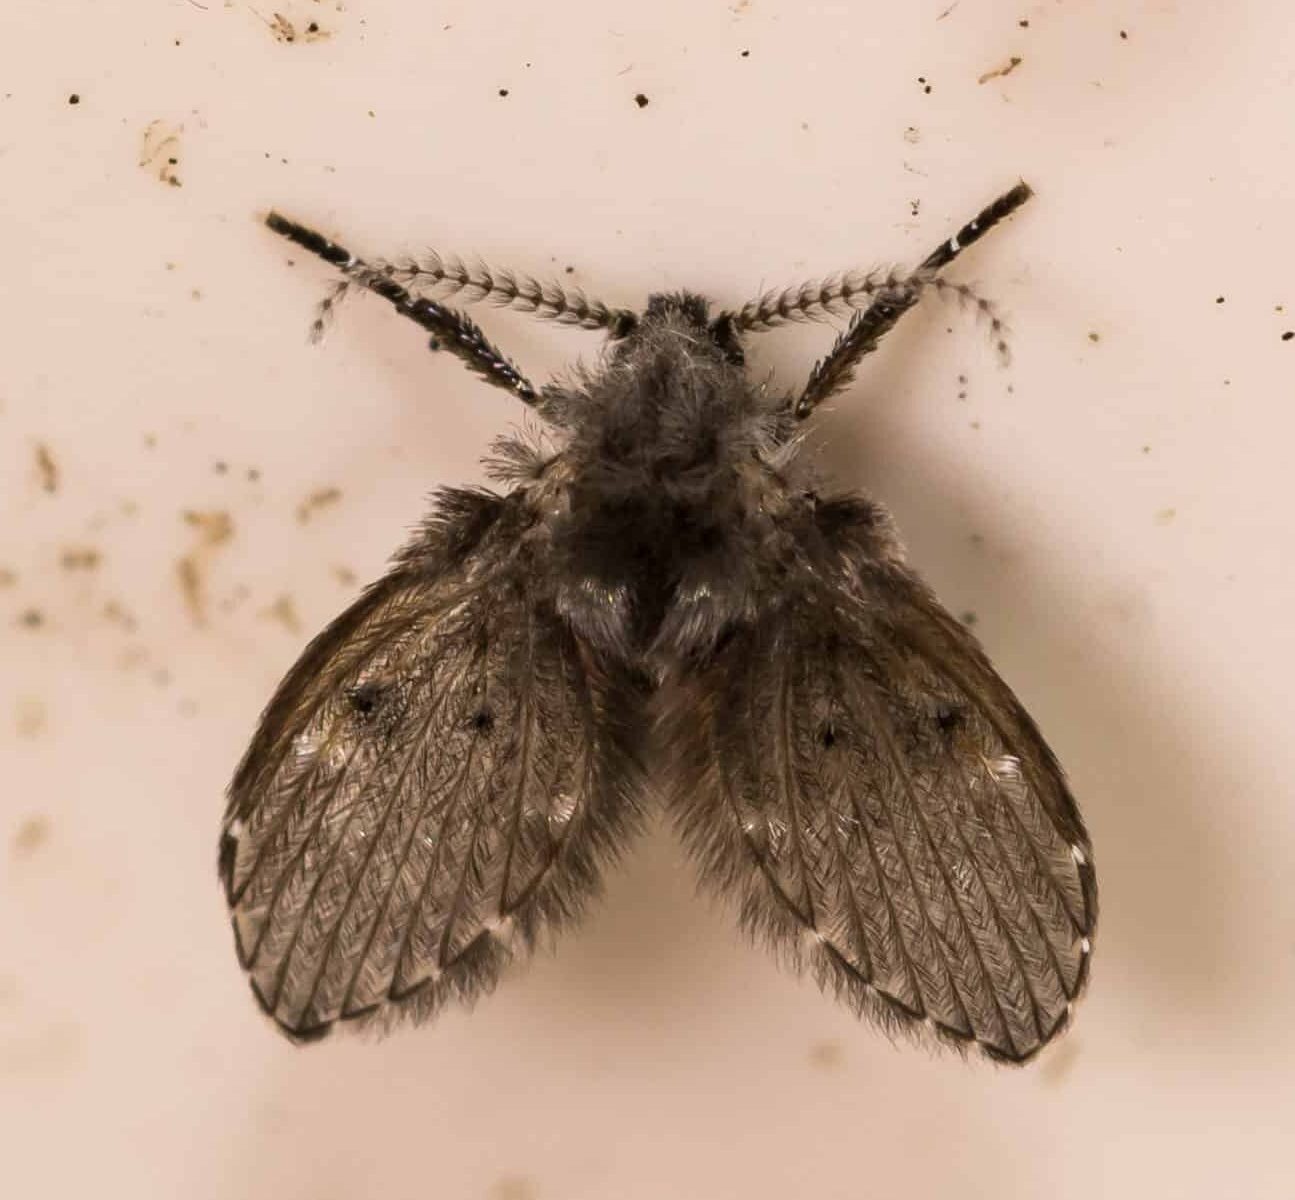 Drain Fly On Wall